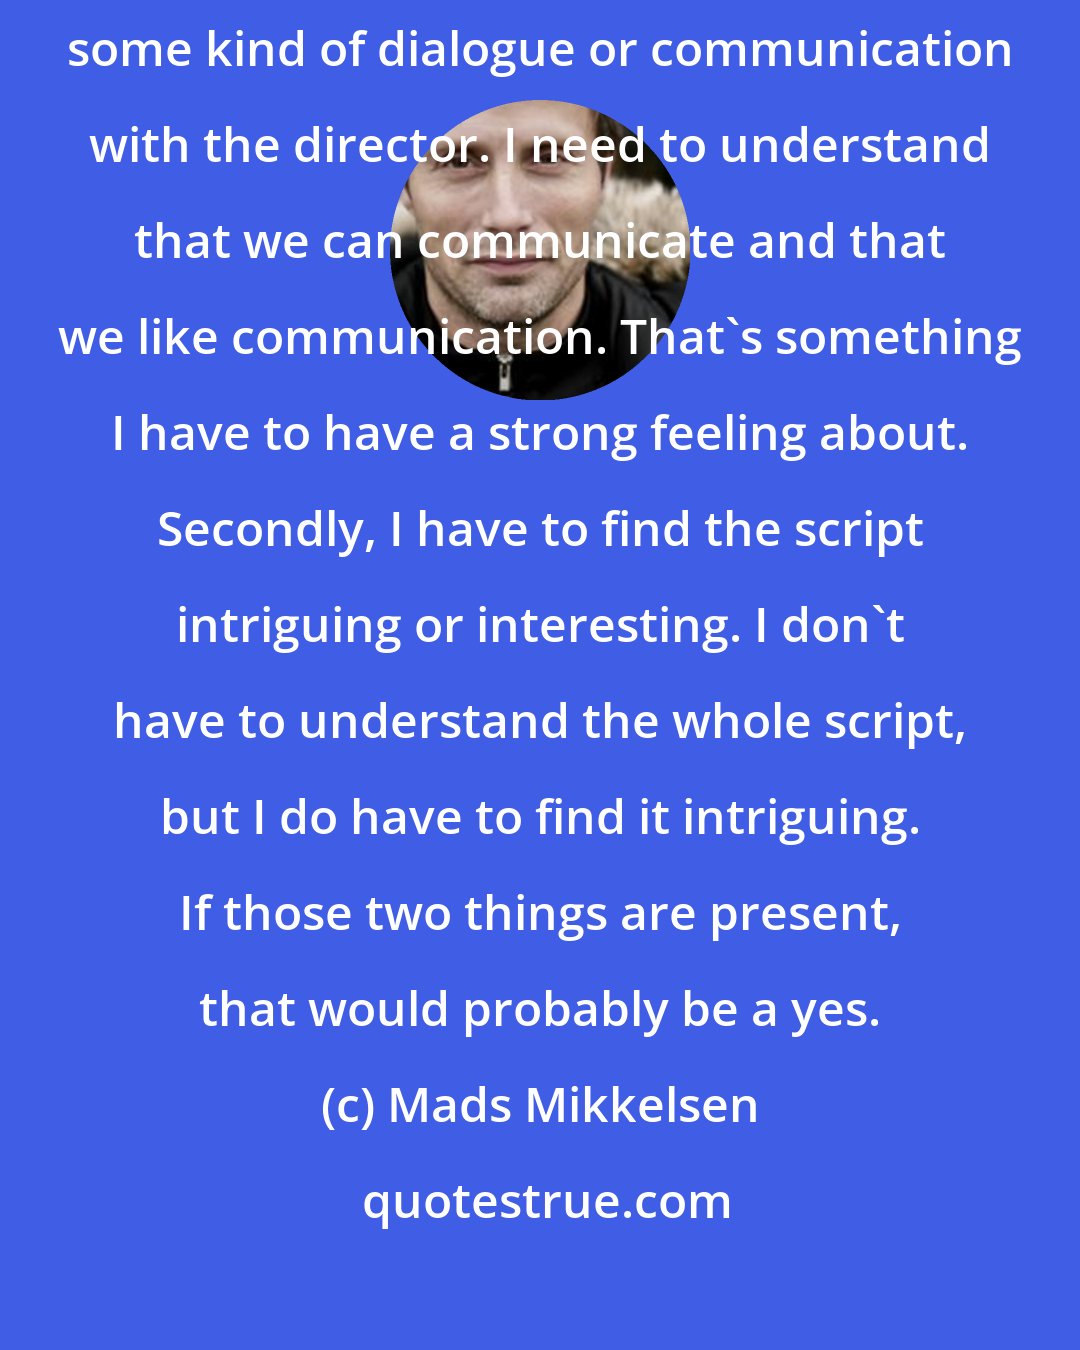 Mads Mikkelsen: The criteria [to take or refuse the role] is that I would love to have some kind of dialogue or communication with the director. I need to understand that we can communicate and that we like communication. That's something I have to have a strong feeling about. Secondly, I have to find the script intriguing or interesting. I don't have to understand the whole script, but I do have to find it intriguing. If those two things are present, that would probably be a yes.